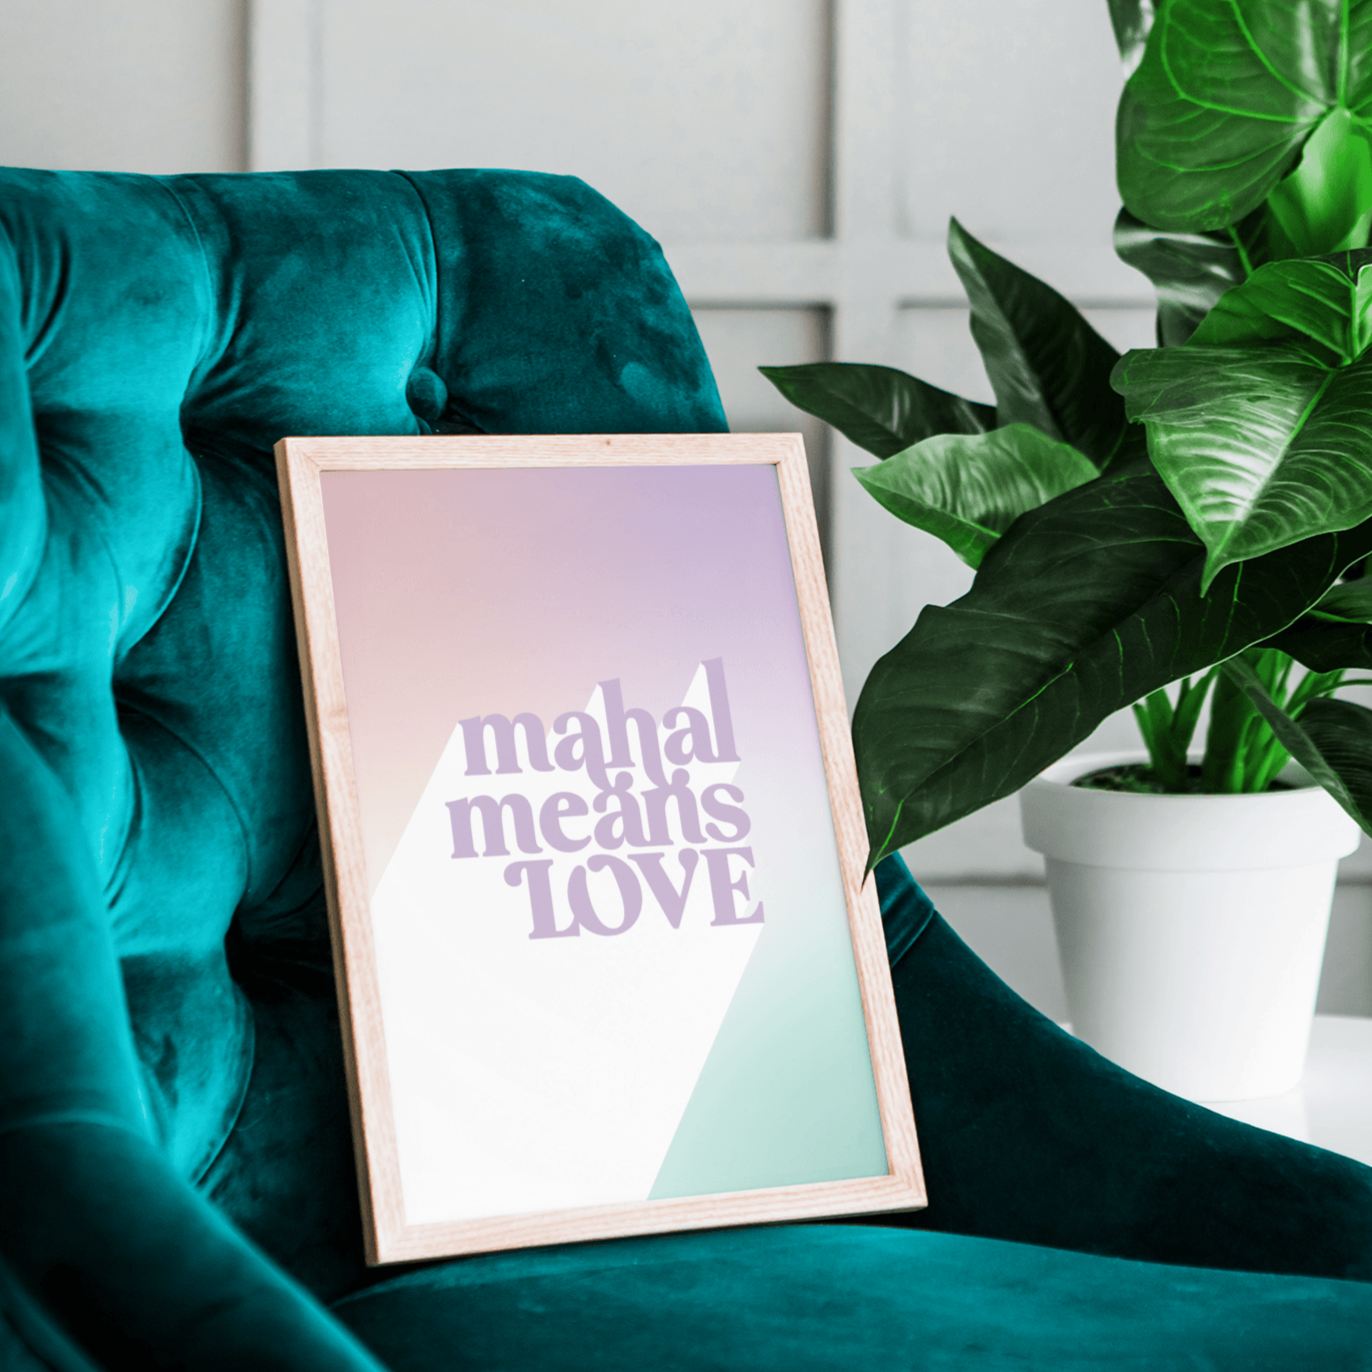 Mahal Means Love (Filipino), Poster - THE WALL SNOB